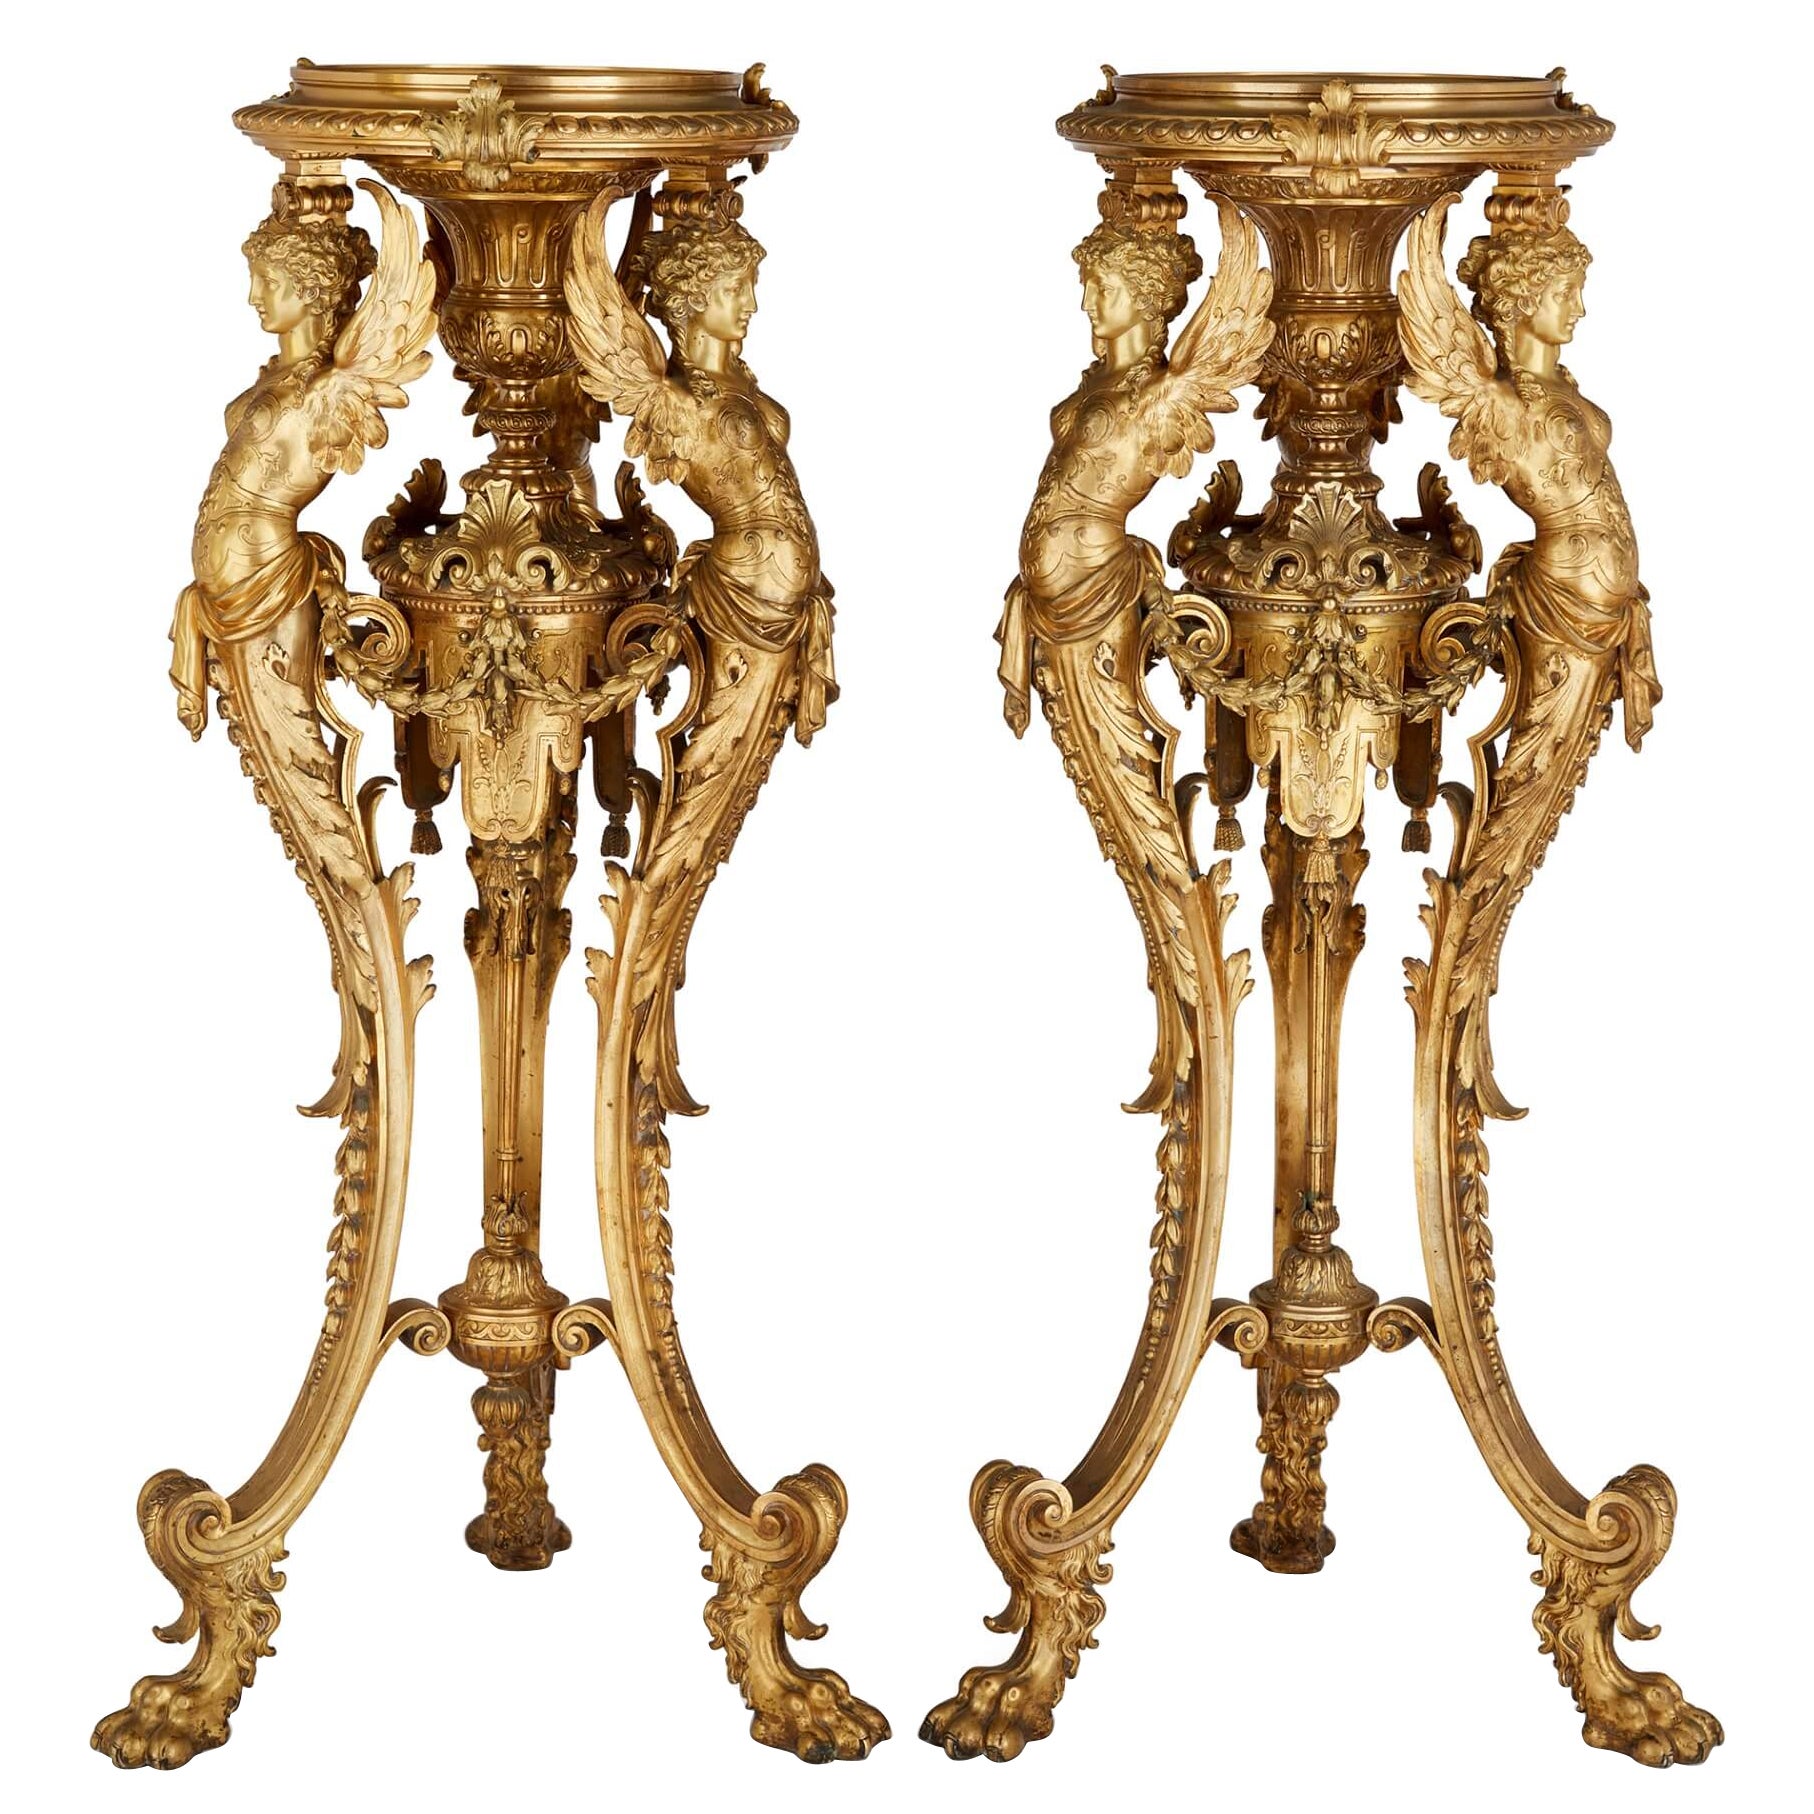 Antique Pair of Ormolu Pedestals with Neo-Grec Sphinx Supports For Sale